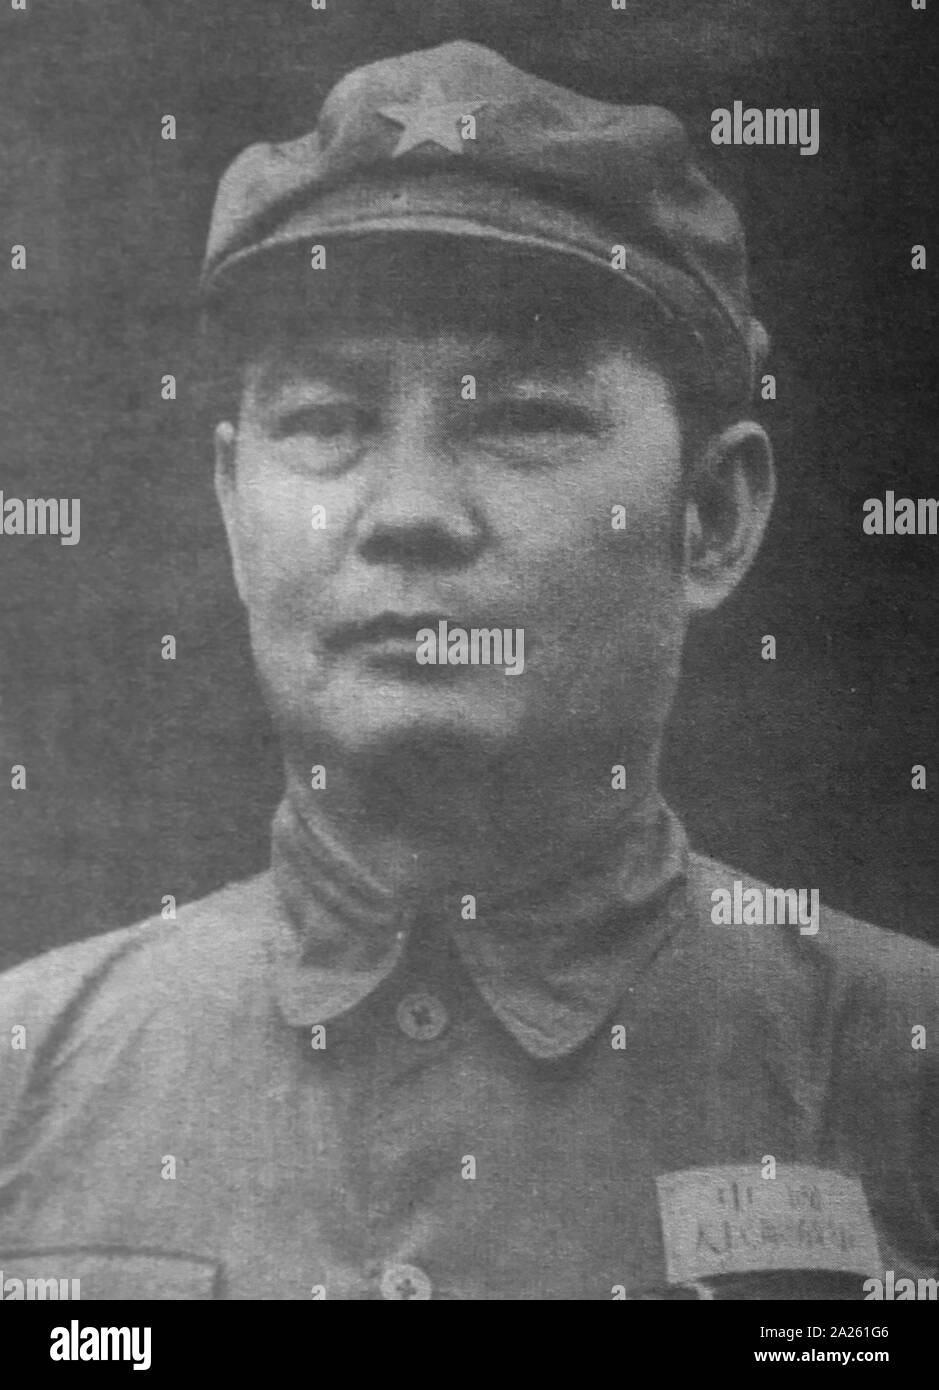 Ye Jianying (1897 - 1986) was a Chinese communist general. As the chairman of the Standing Committee of the National People's Congress from 1978 to 1983, Ye was the head of state of the People's Republic of China. Stock Photo